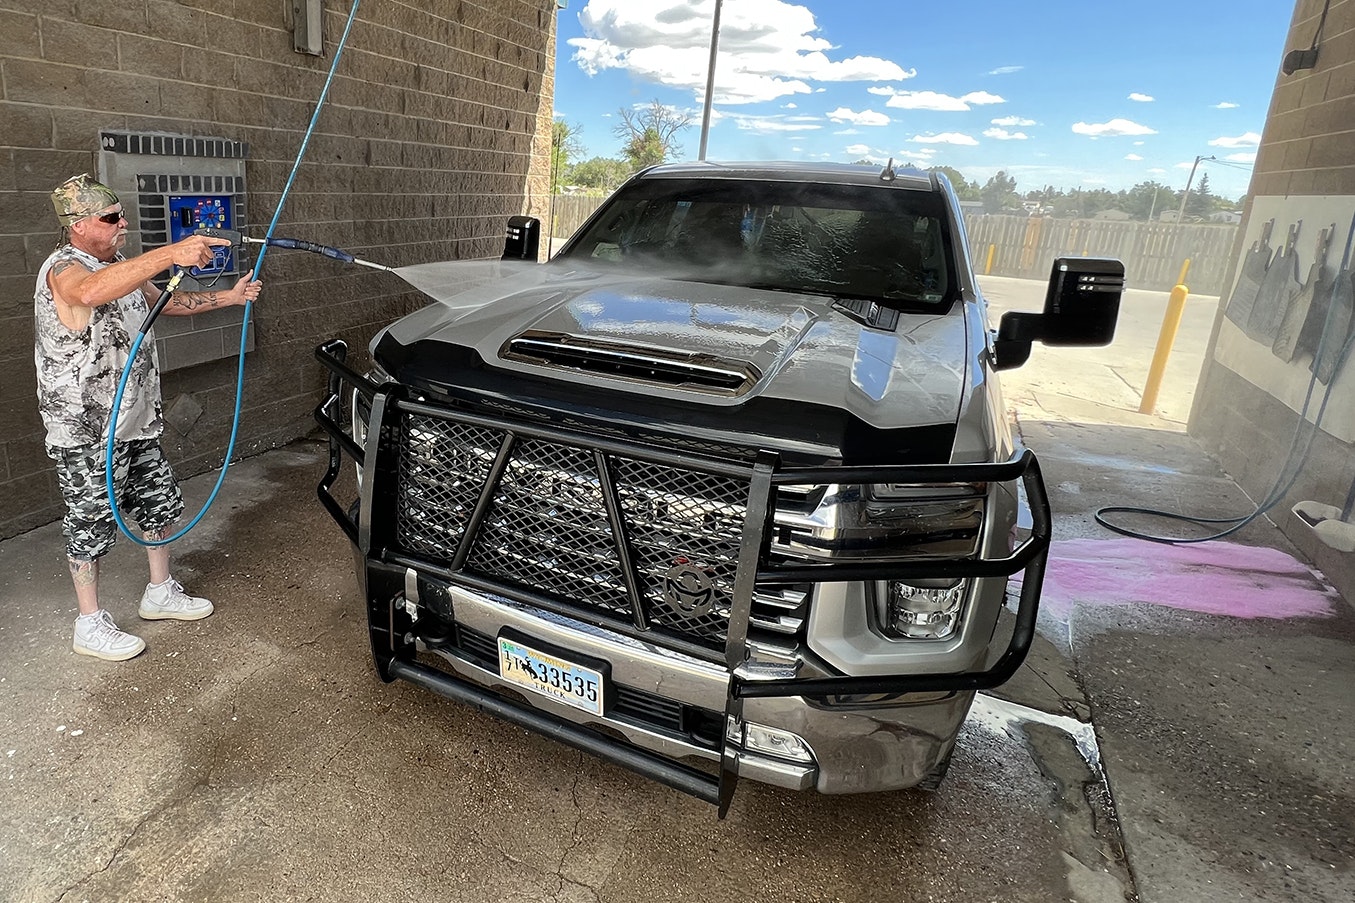 Mark Fillmore of Cheyenne washes his 2020 Chevy 2500 Silverado. While his is a work truck, Fillmore said he has another truck at home and that he's a truck guy through and through.